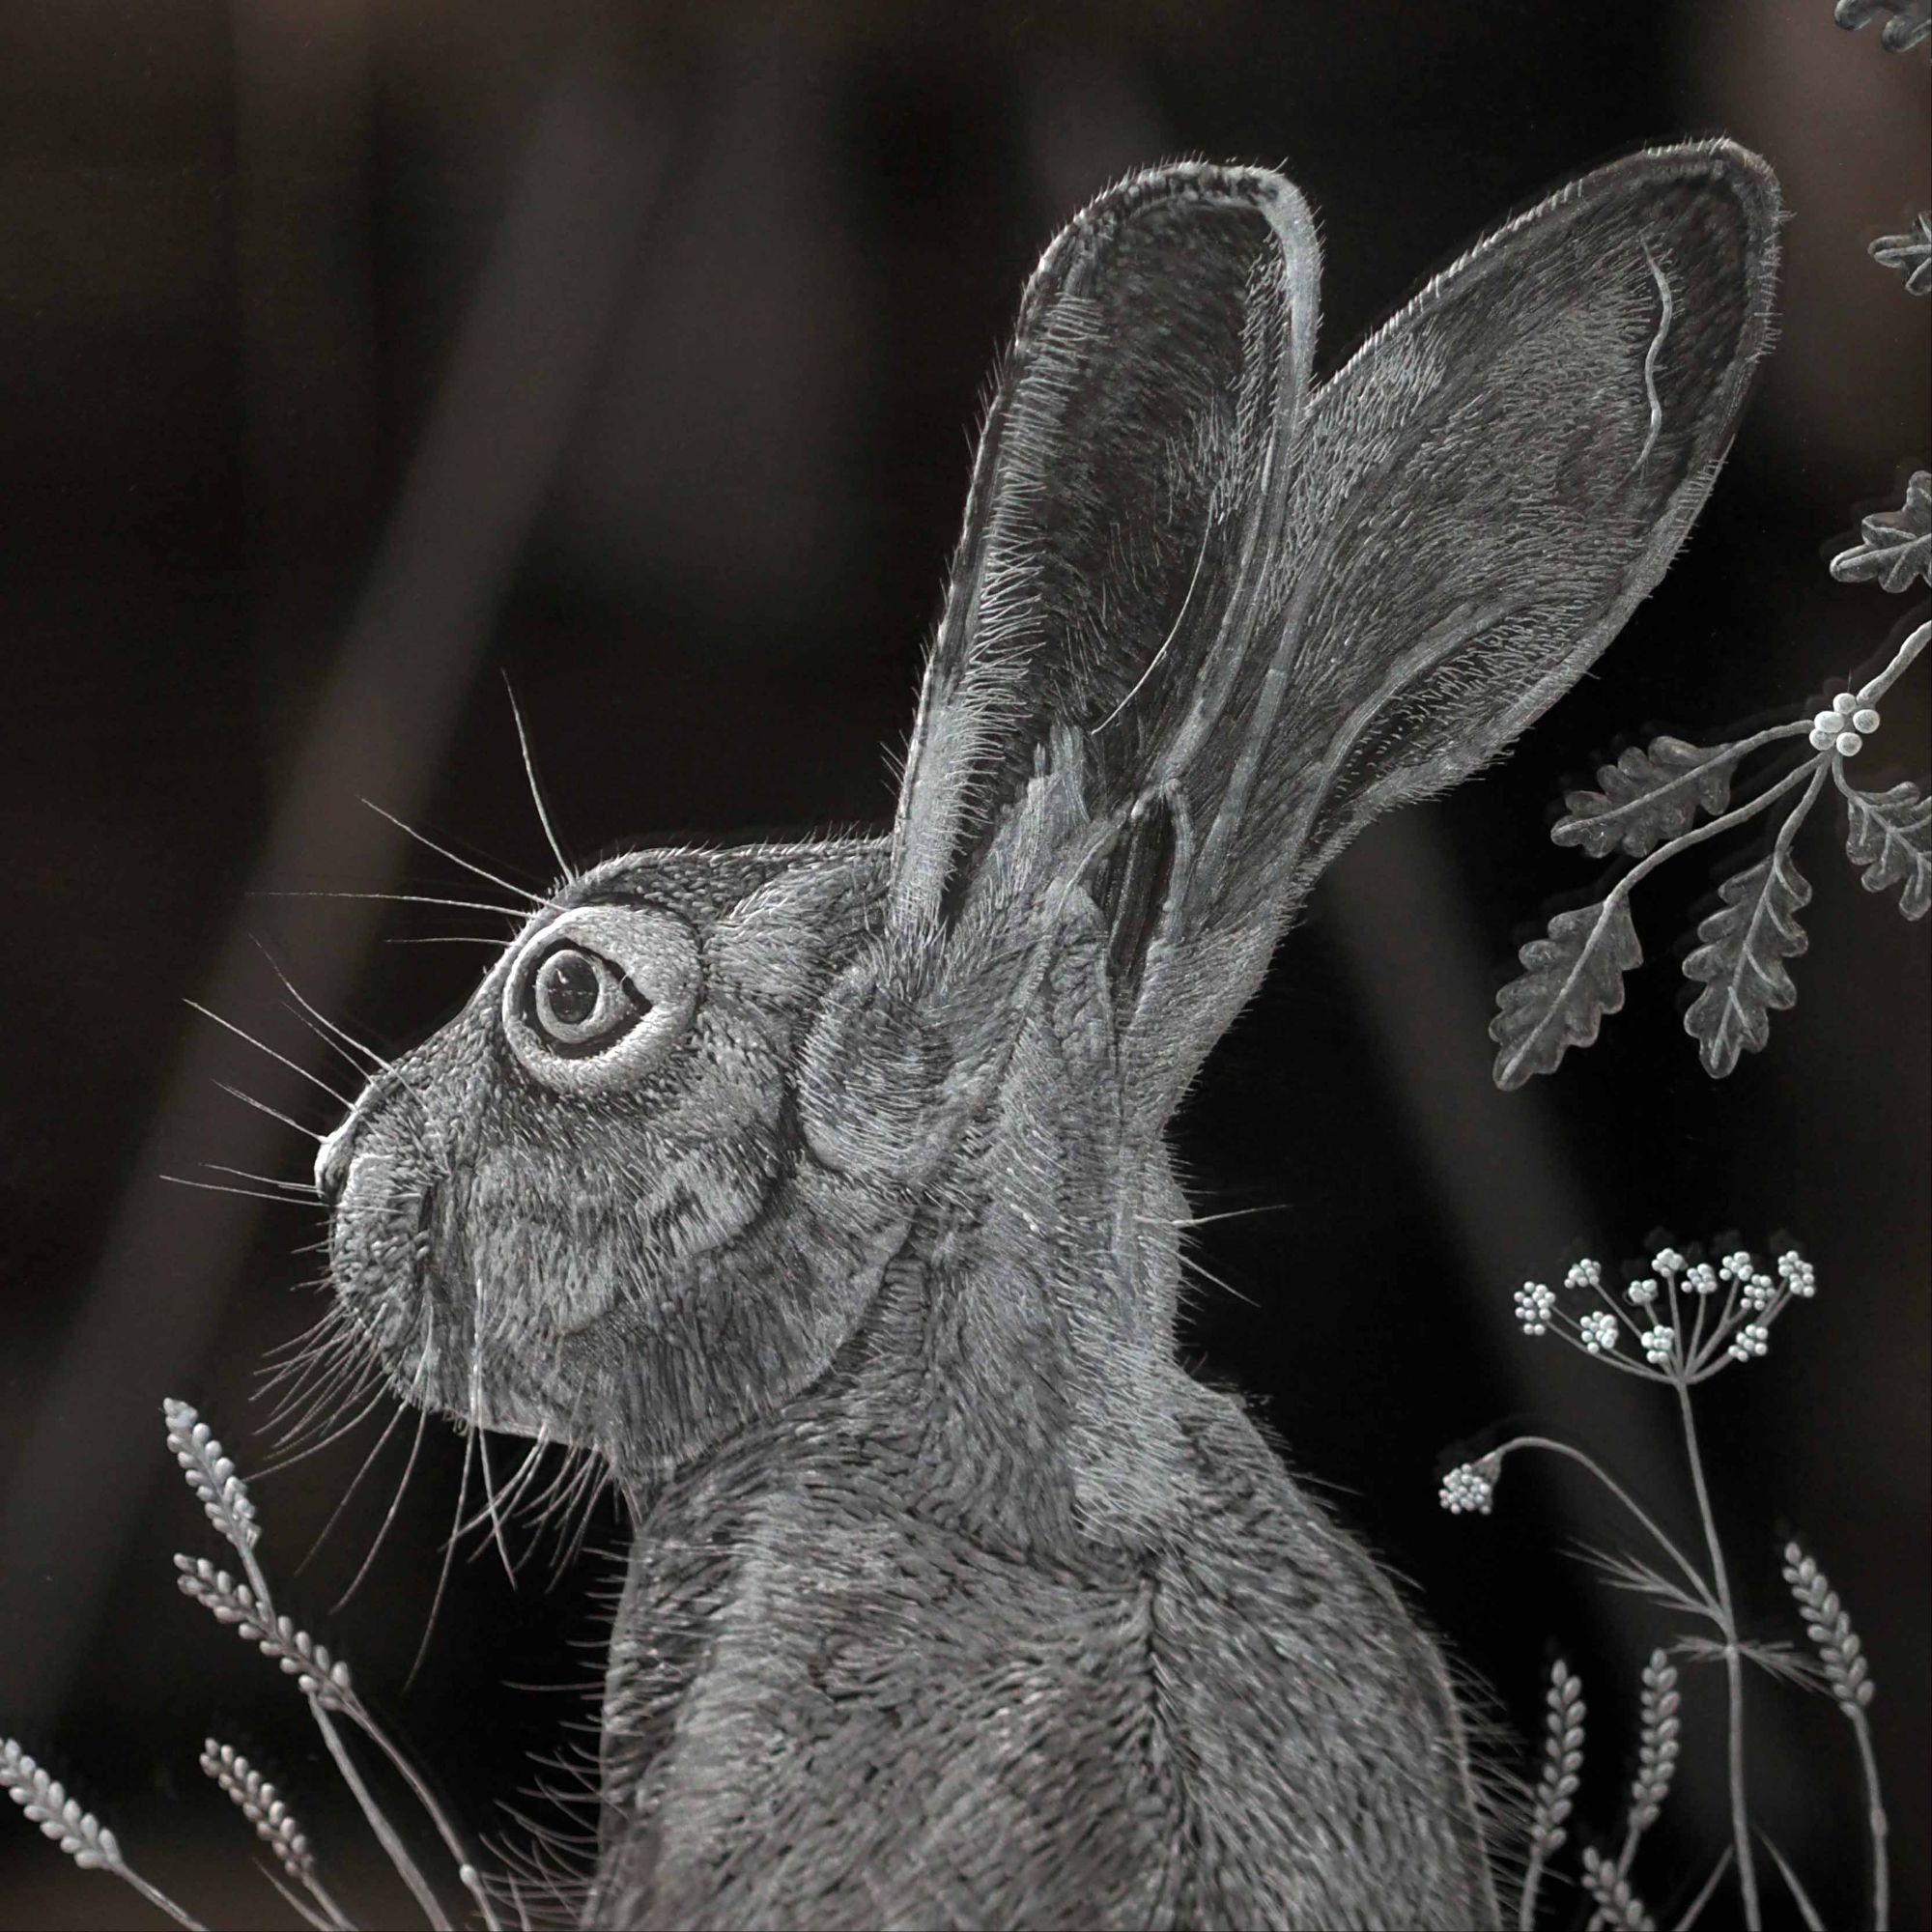 HARE WINDOW PANEL ENGRAVING CLOSE UP